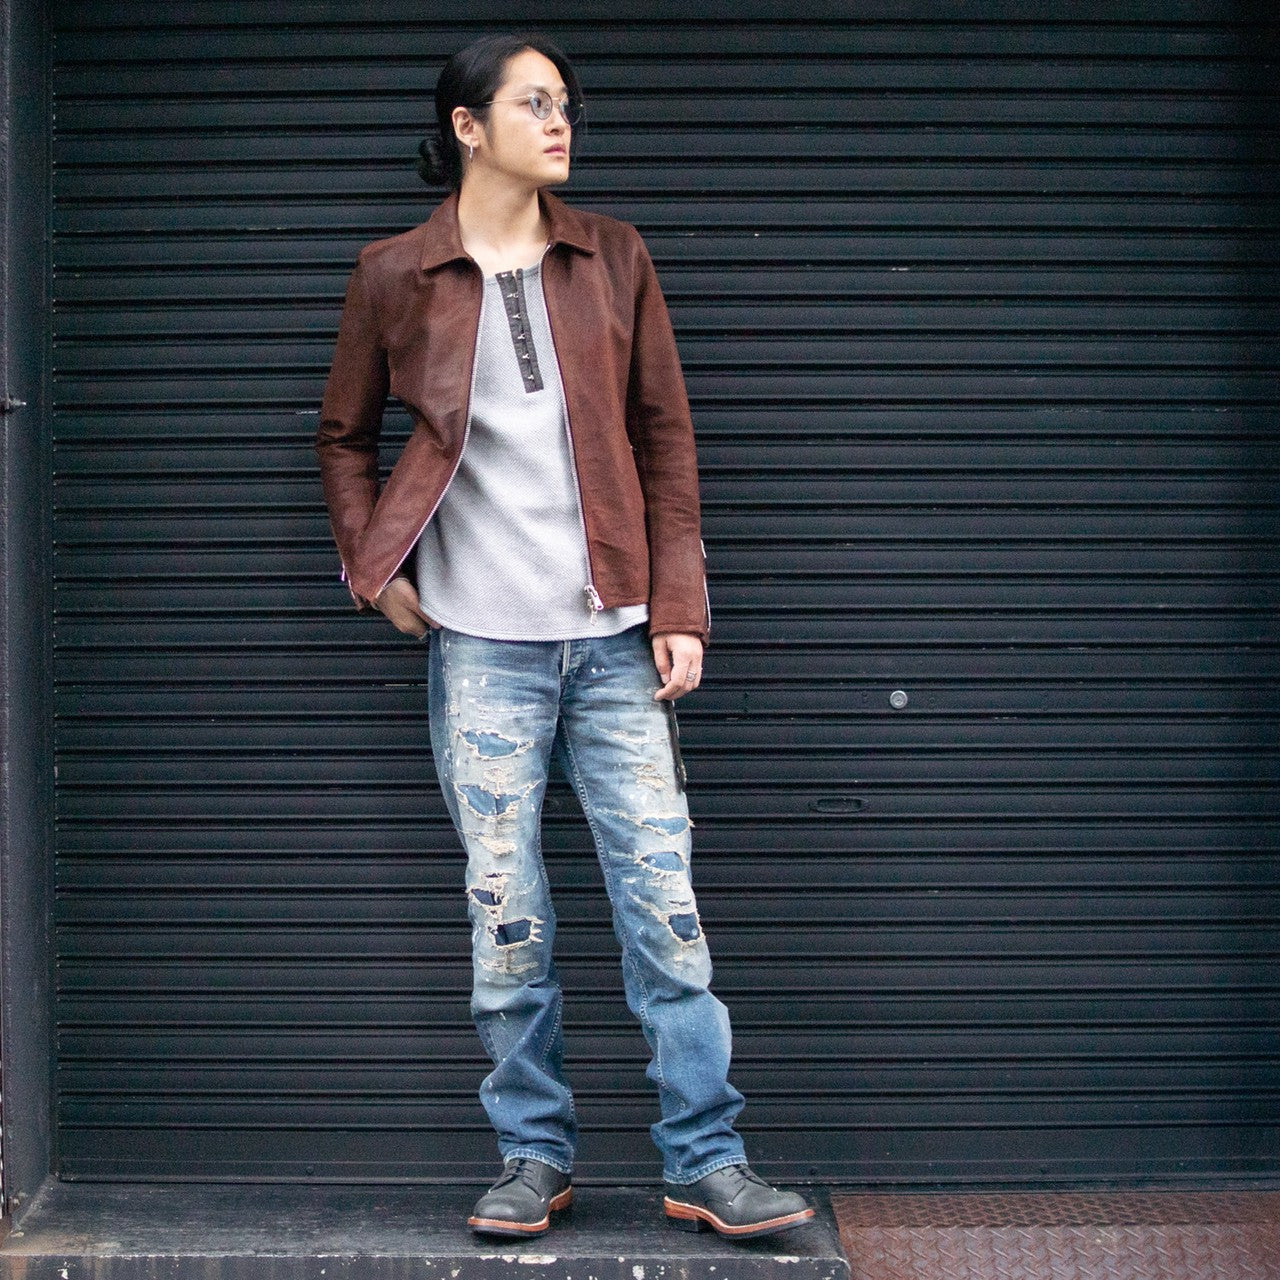 Pick up a reputable model from STRUM JEANS Vol.2